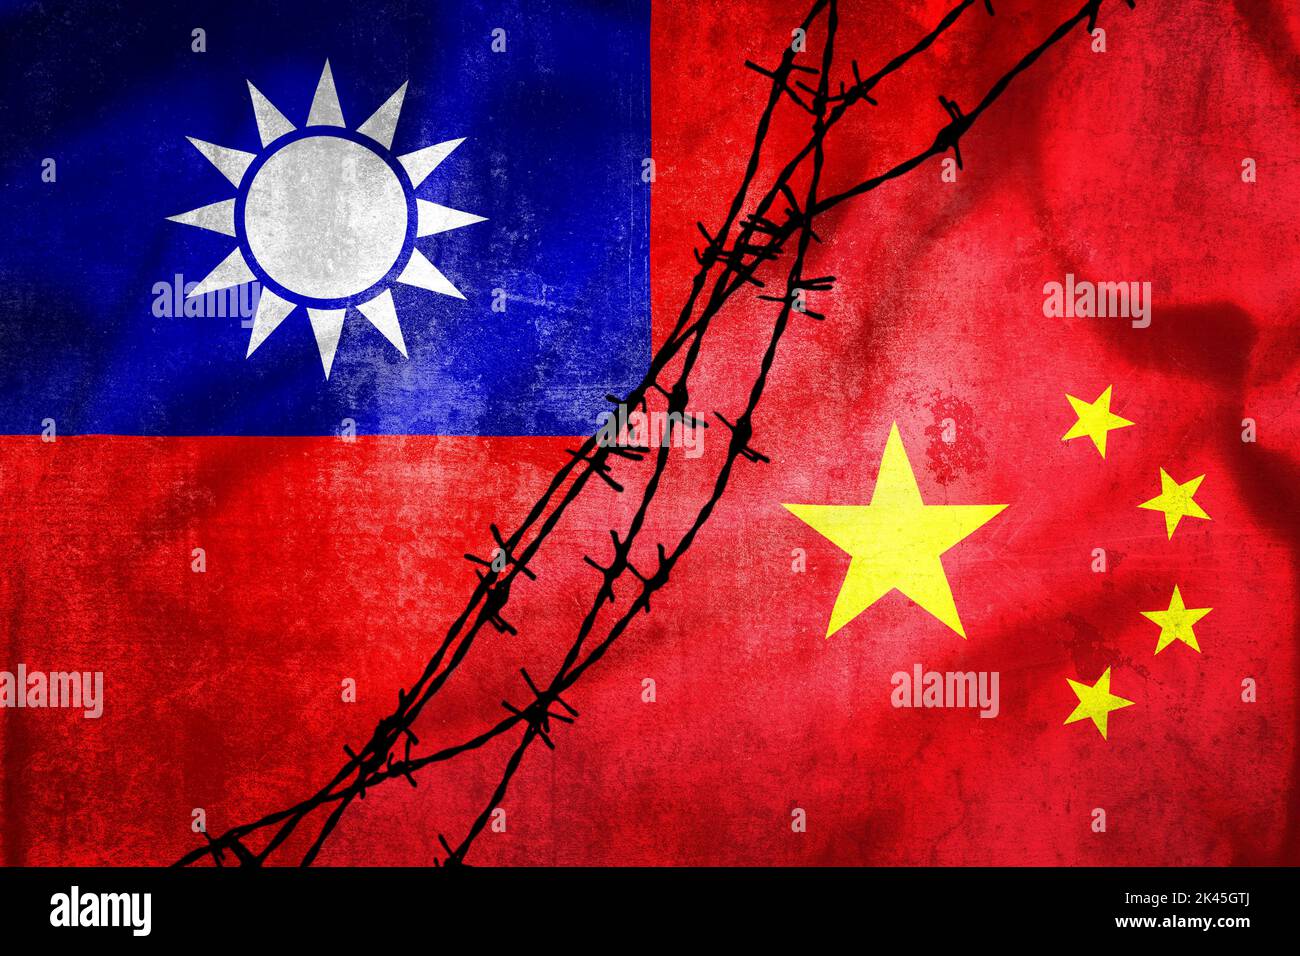 Grunge flags of Taiwan and China divided by barb wire illustration, concept of tense relations between Taiwan and China Stock Photo